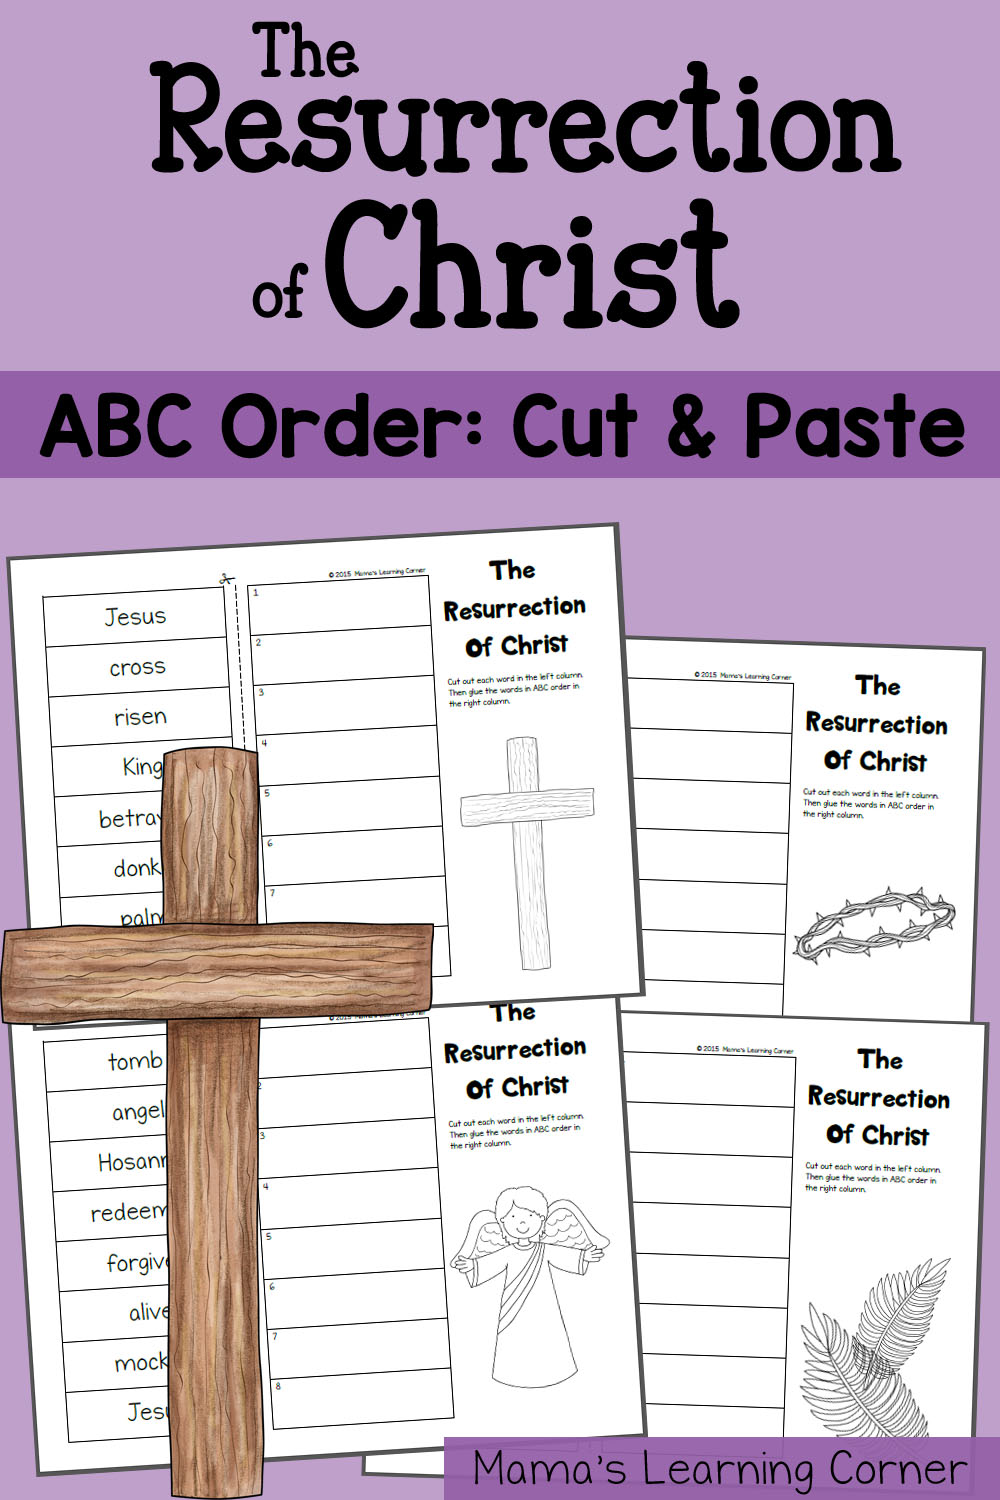 ABC Order Worksheet (Cut and Paste!): The Resurrection of Christ